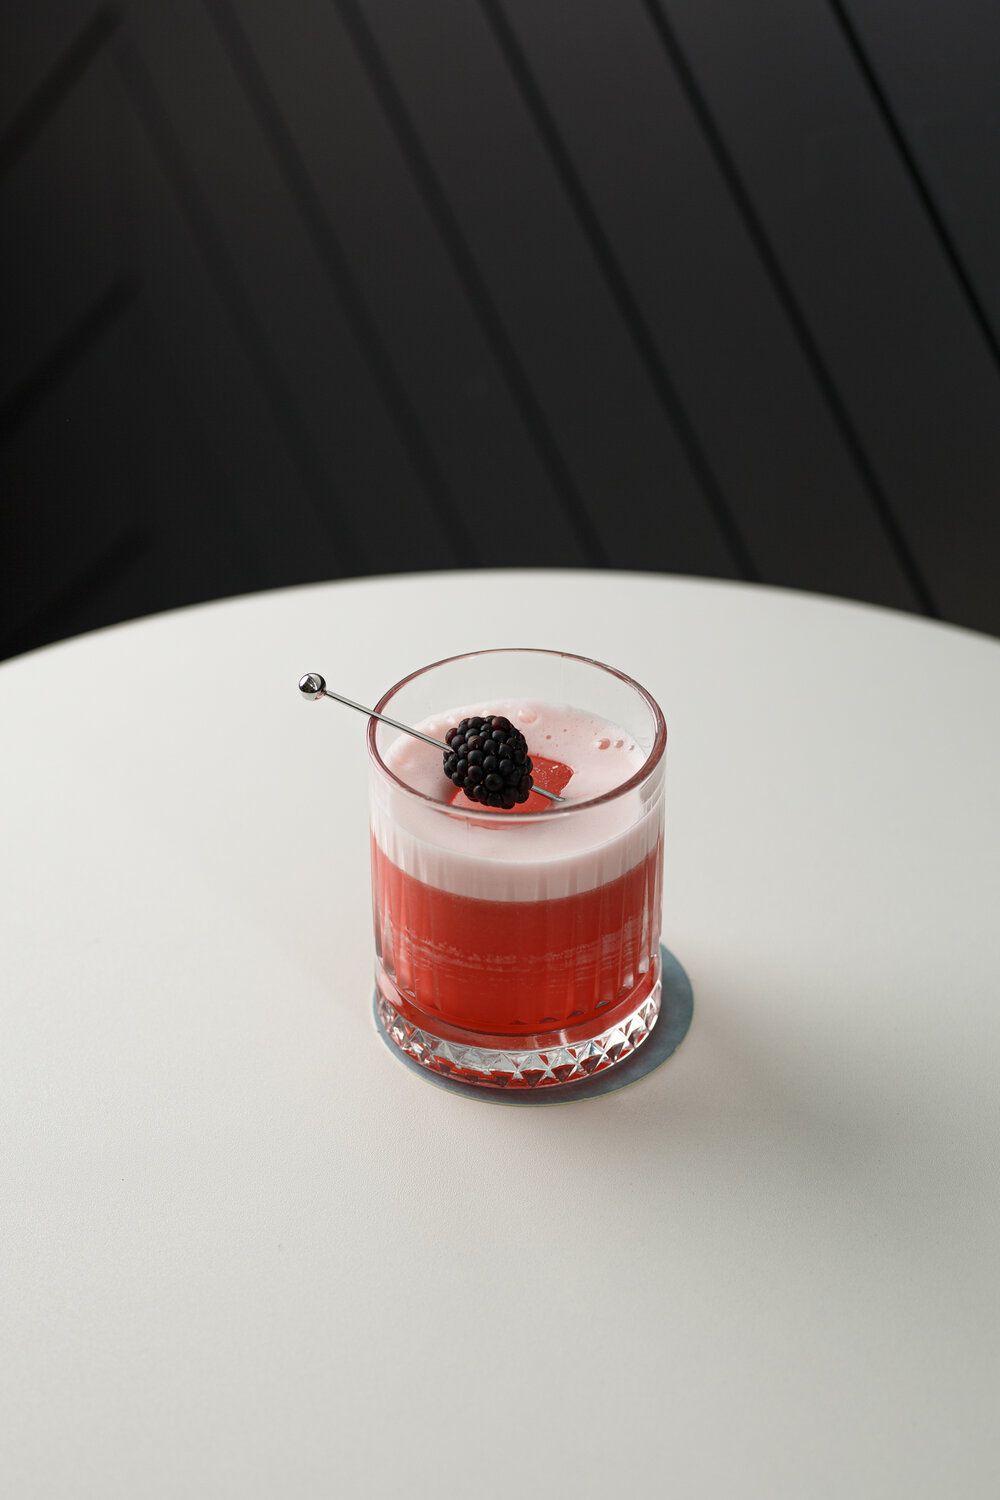 This cocktail from Brisbane's Dawn brings blackberry and lemon to bourbon